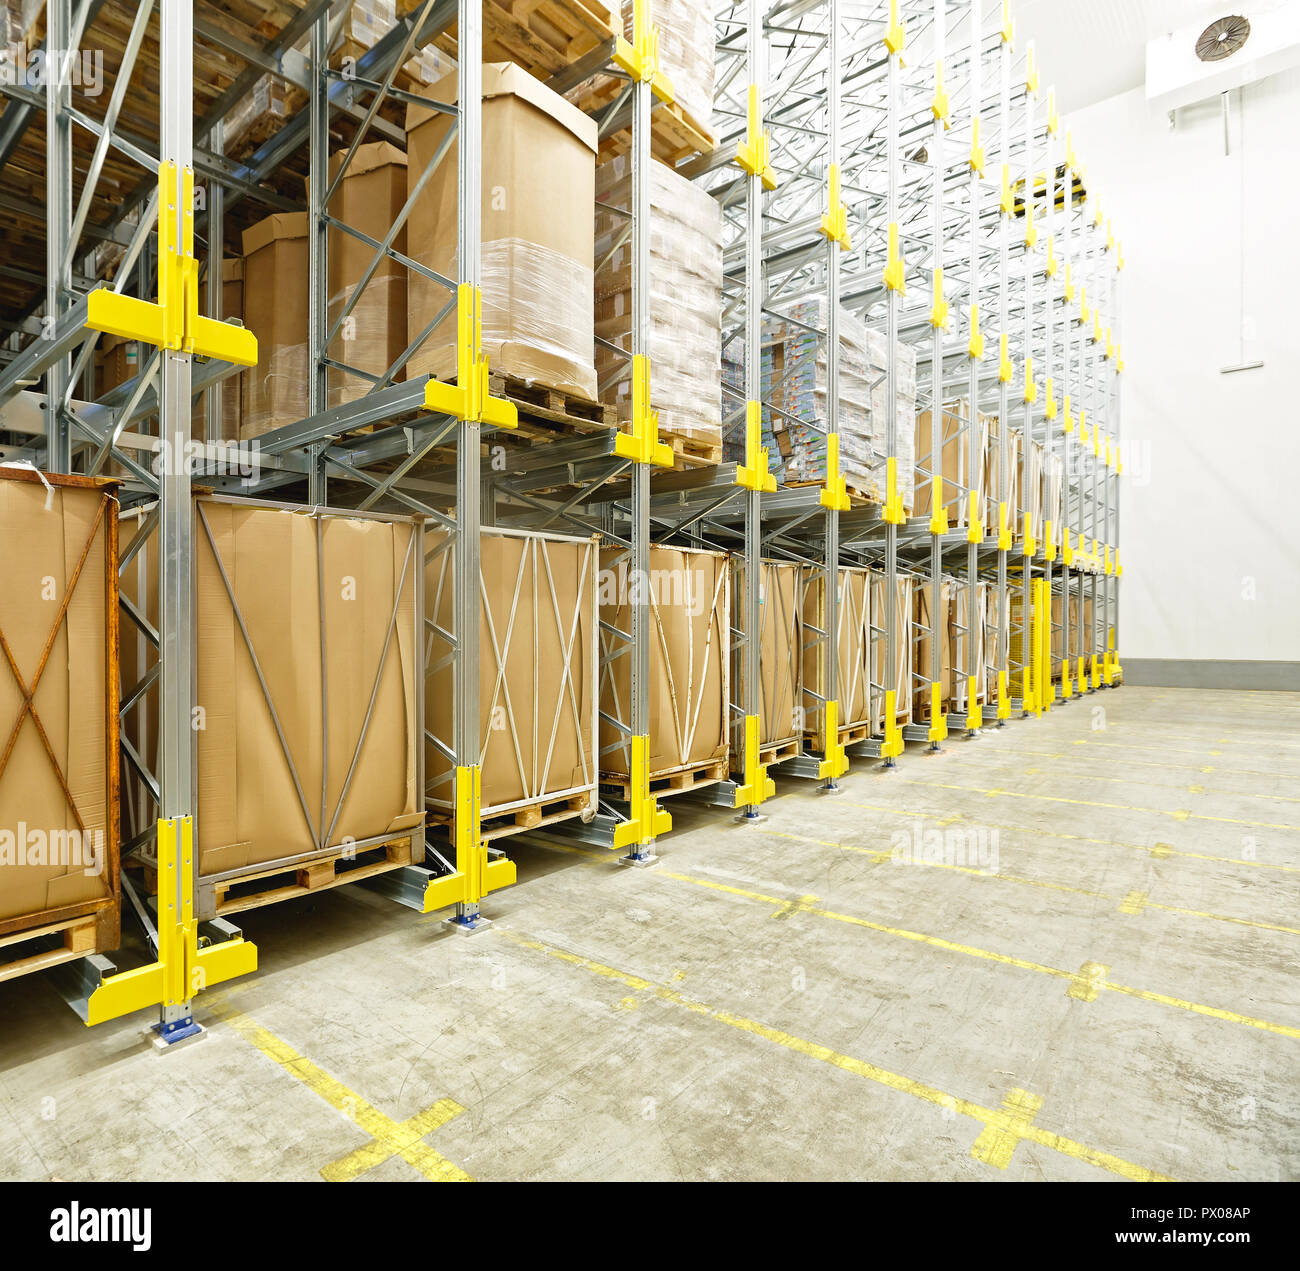 Shelving System in Cold Distribution Warehouse Stock Photo